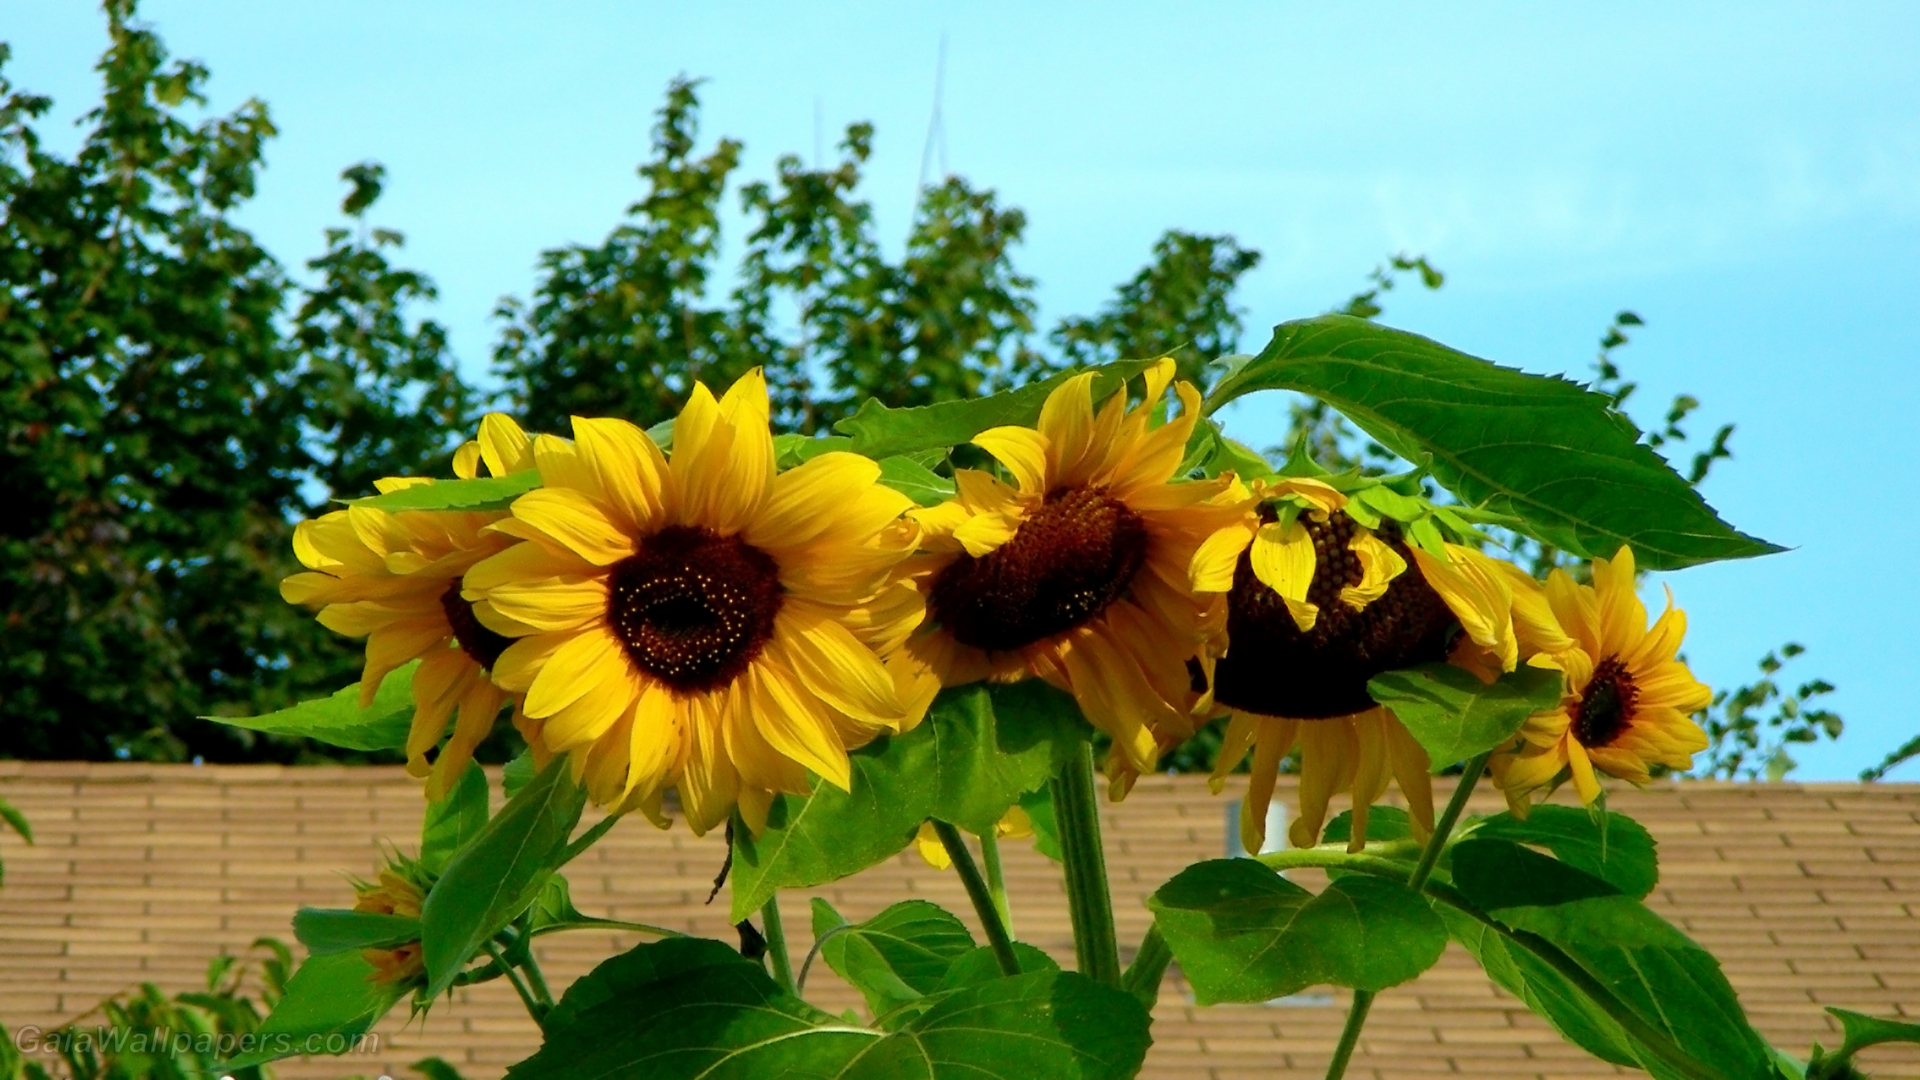 Family of sunflowers - Free desktop wallpapers